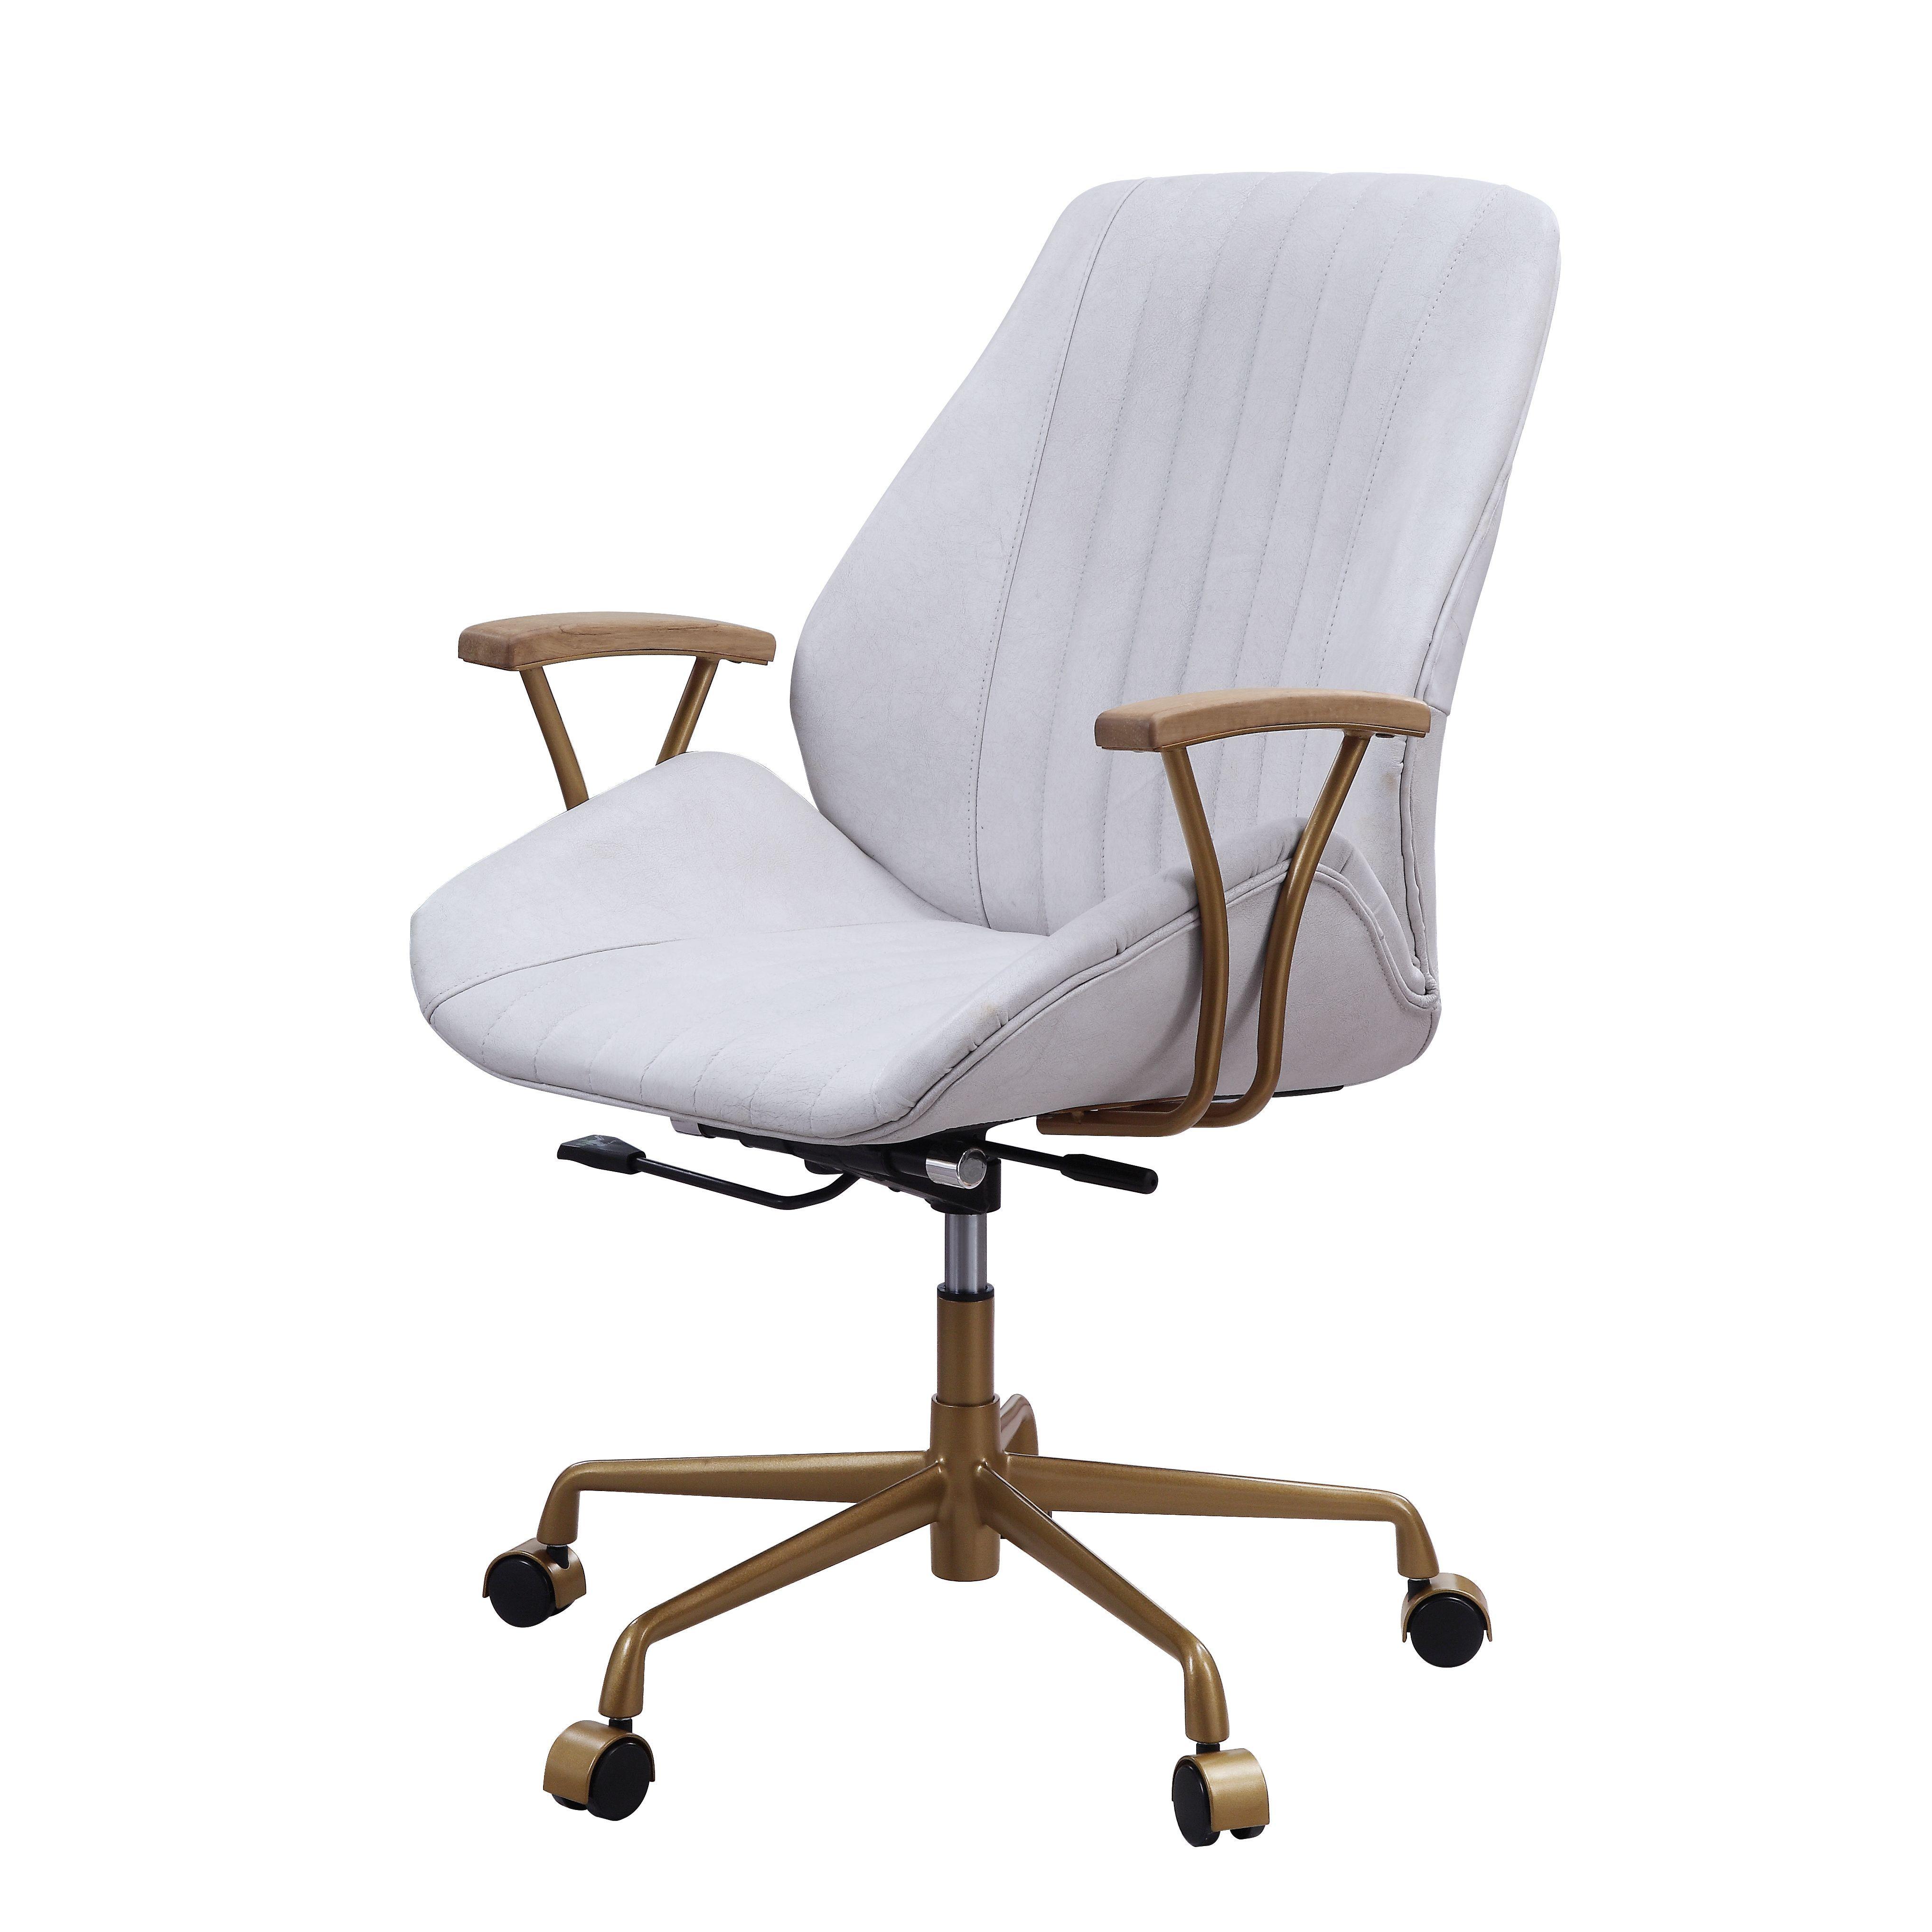 Modern, Classic Home Office Chair Argrio 93241 in Vintage White Top grain leather